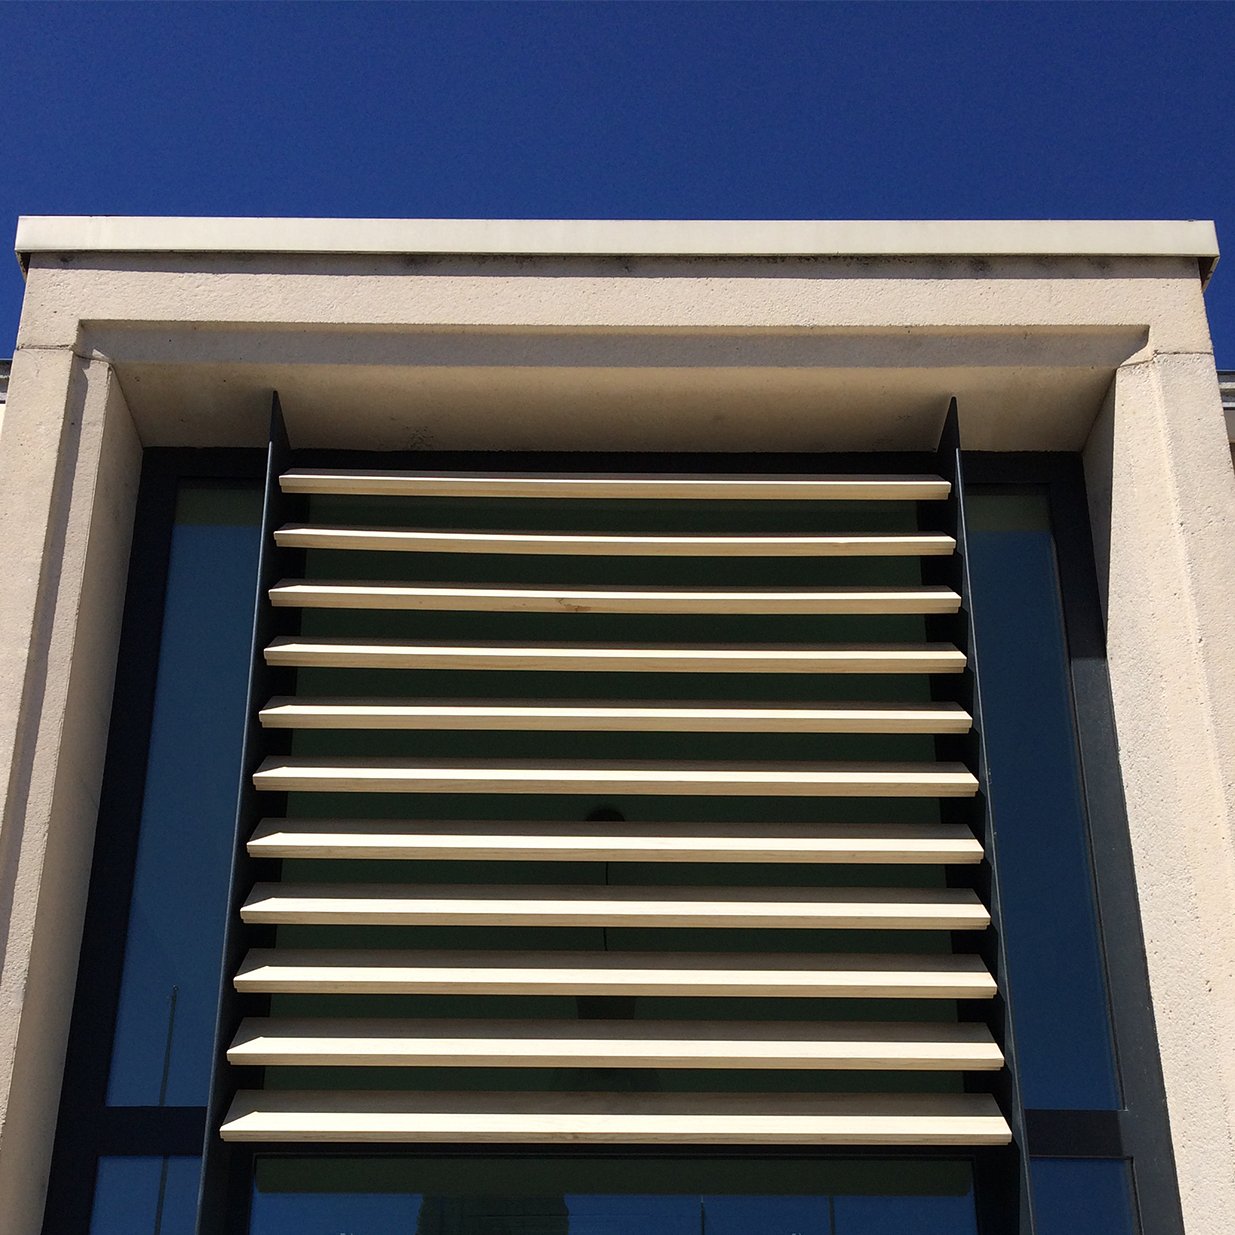 Be inspired with window shutters made to last